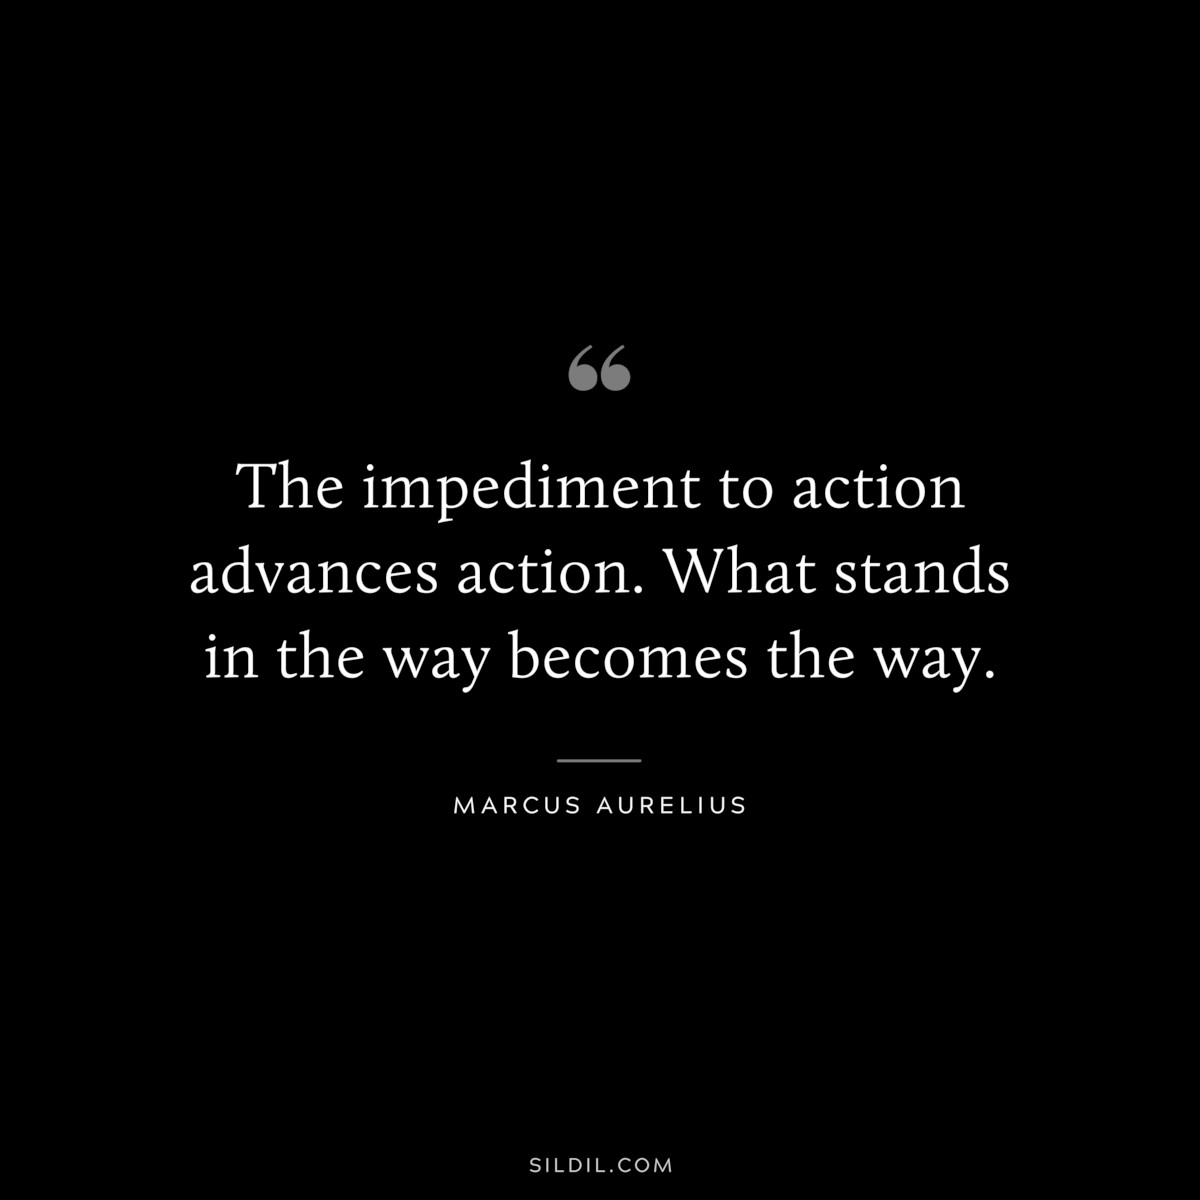 The impediment to action advances action. What stands in the way becomes the way. ― Marcus Aurelius